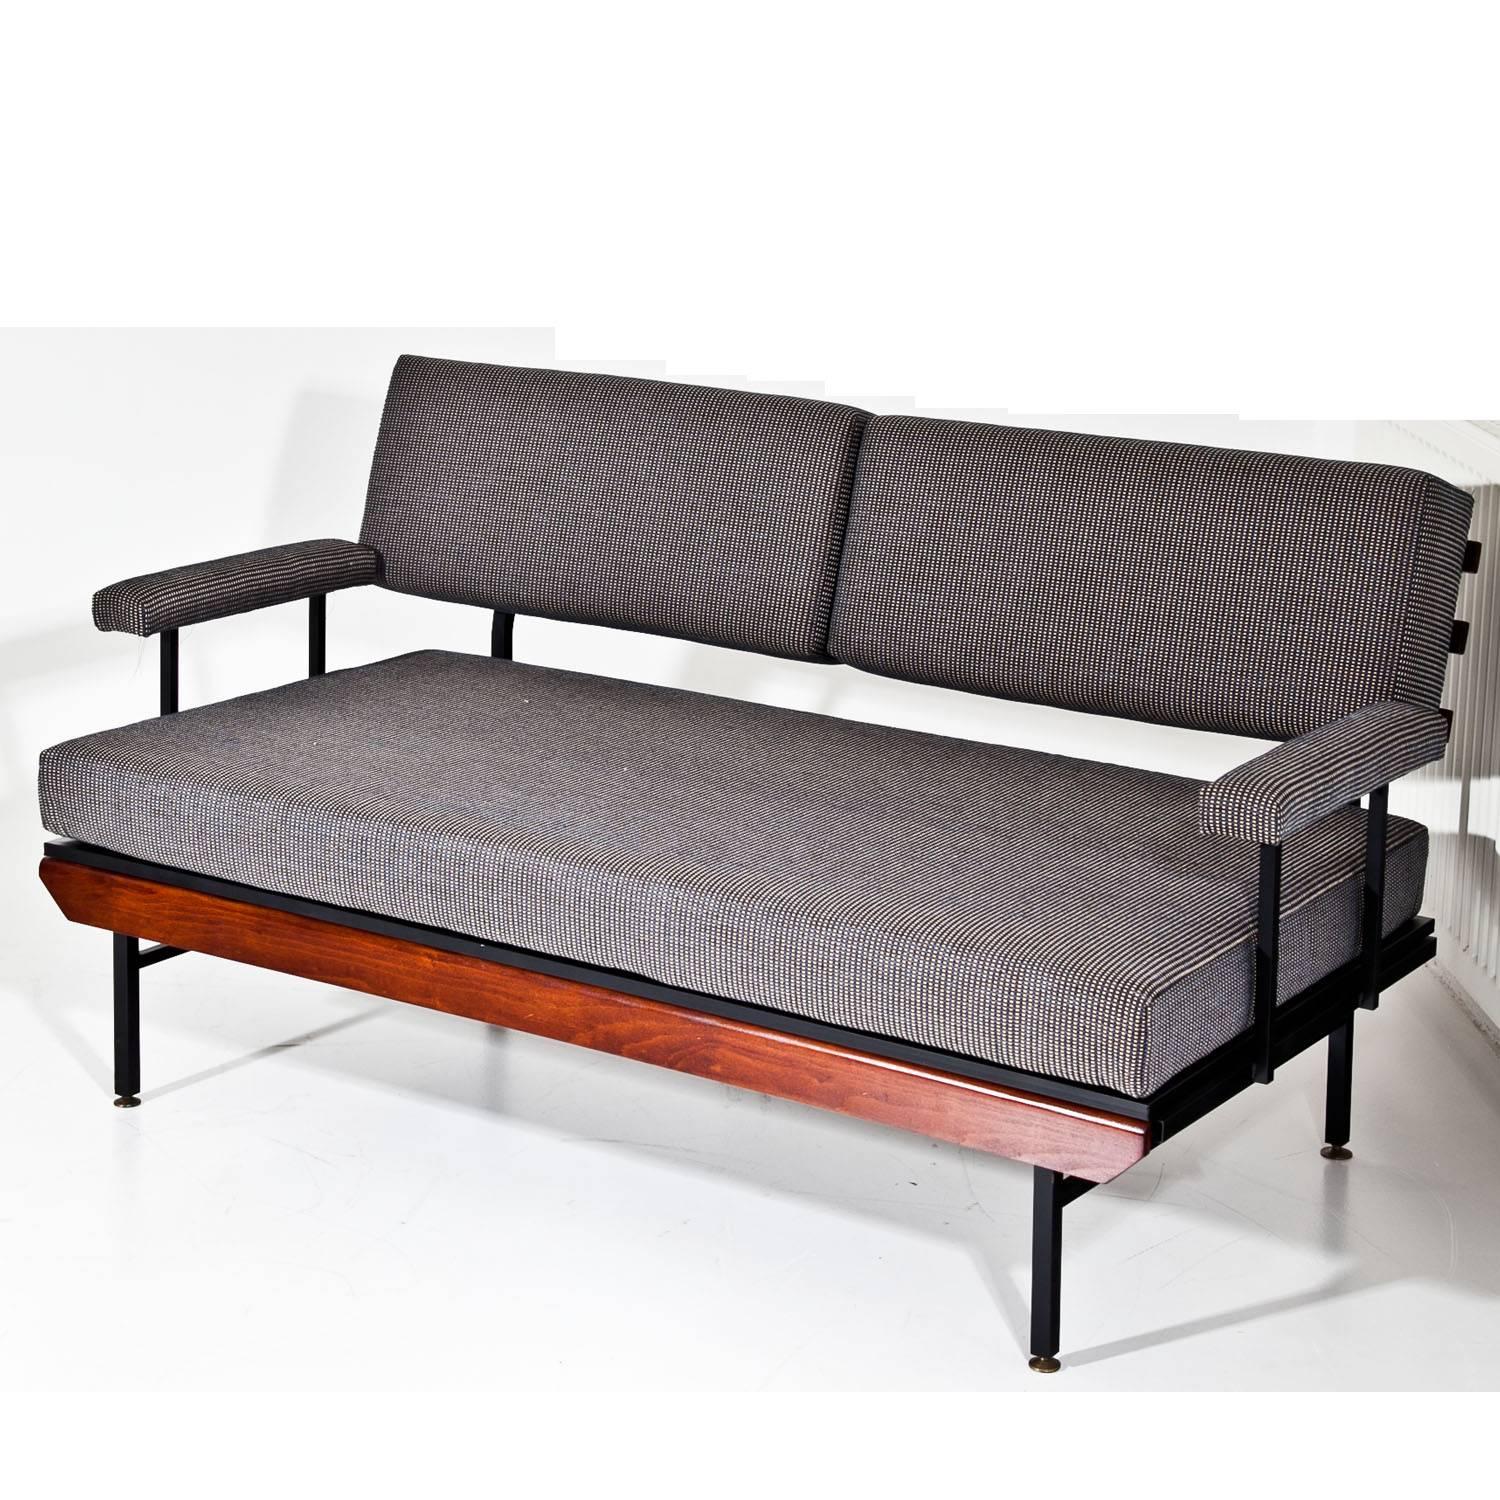 Seating group, consisting of two two-seat sofas and two armchairs of the mid-20th century. The sofas and armchairs stand on black iron feet and each armrest is supported by two iron bars. The backrests are rectangular cushions and the upholstery is